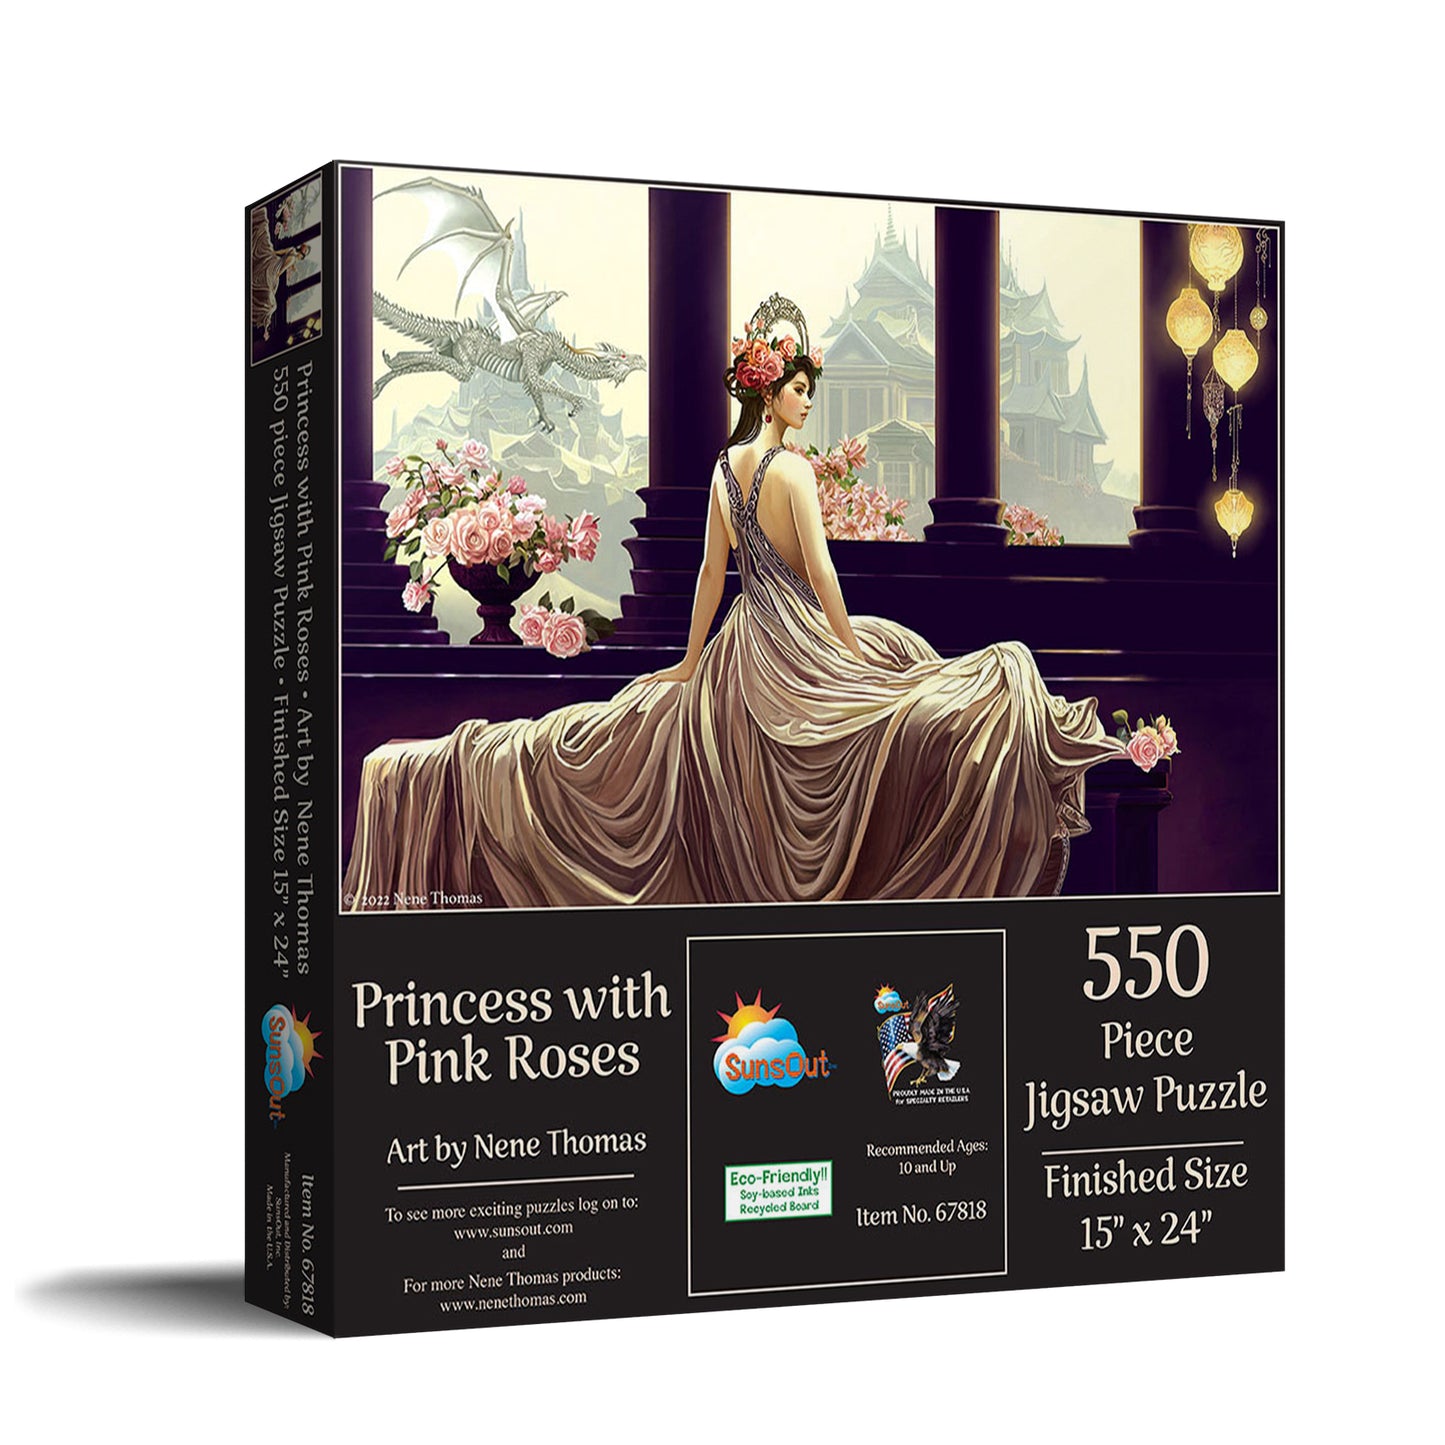 Princess with Pink Roses 550 - 550 Piece Jigsaw Puzzle